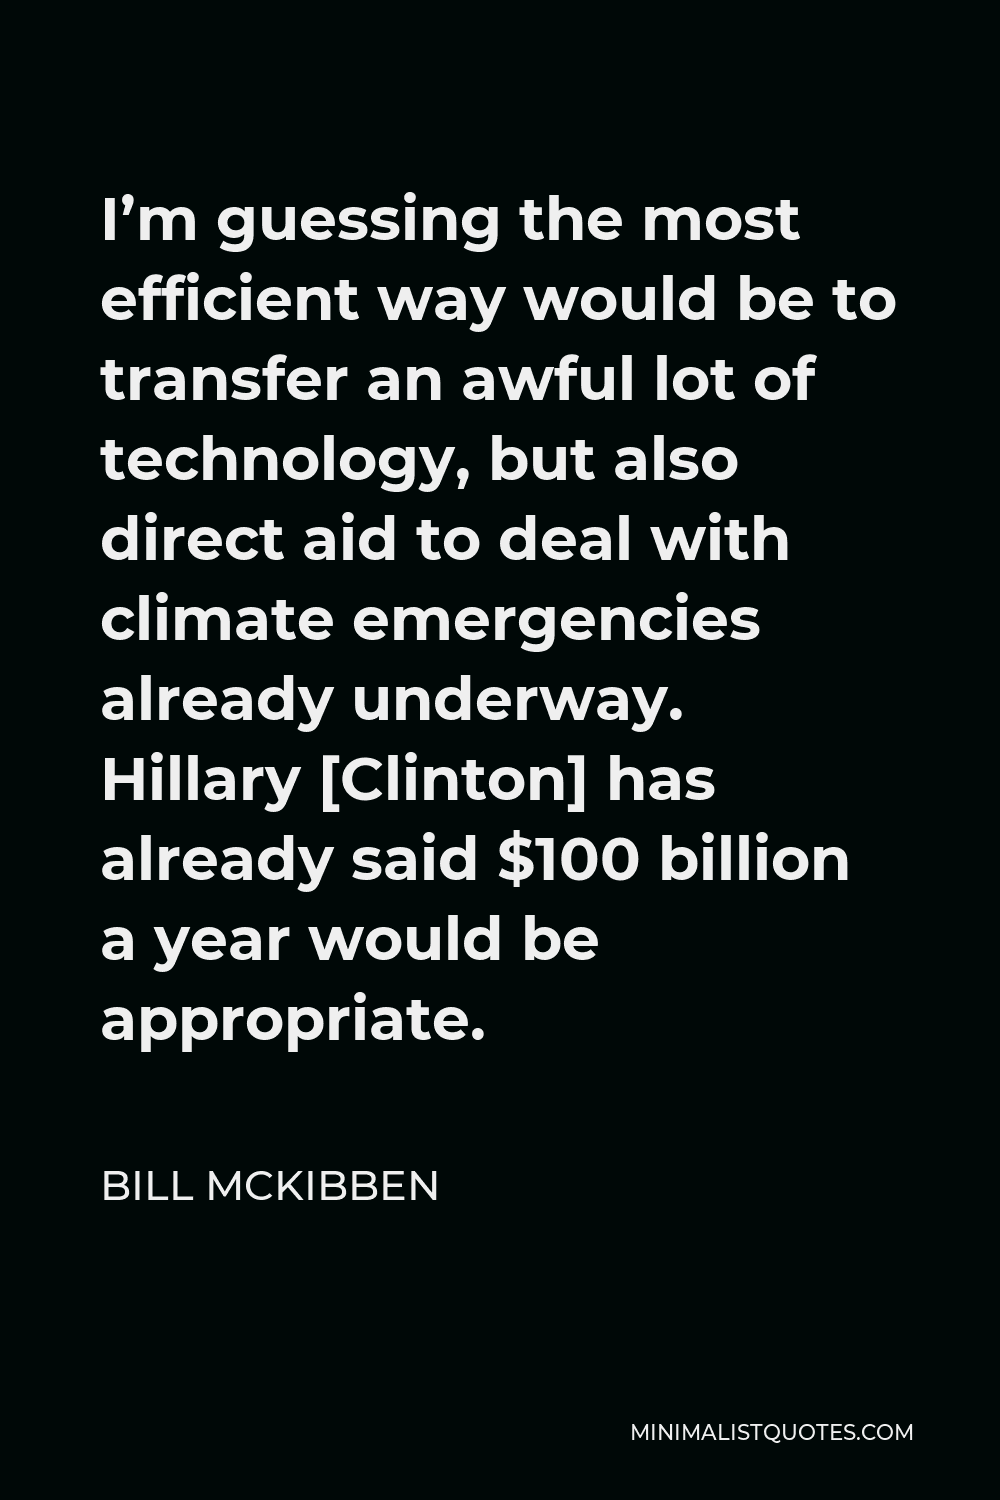 Bill McKibben Quote - I’m guessing the most efficient way would be to transfer an awful lot of technology, but also direct aid to deal with climate emergencies already underway. Hillary [Clinton] has already said $100 billion a year would be appropriate.